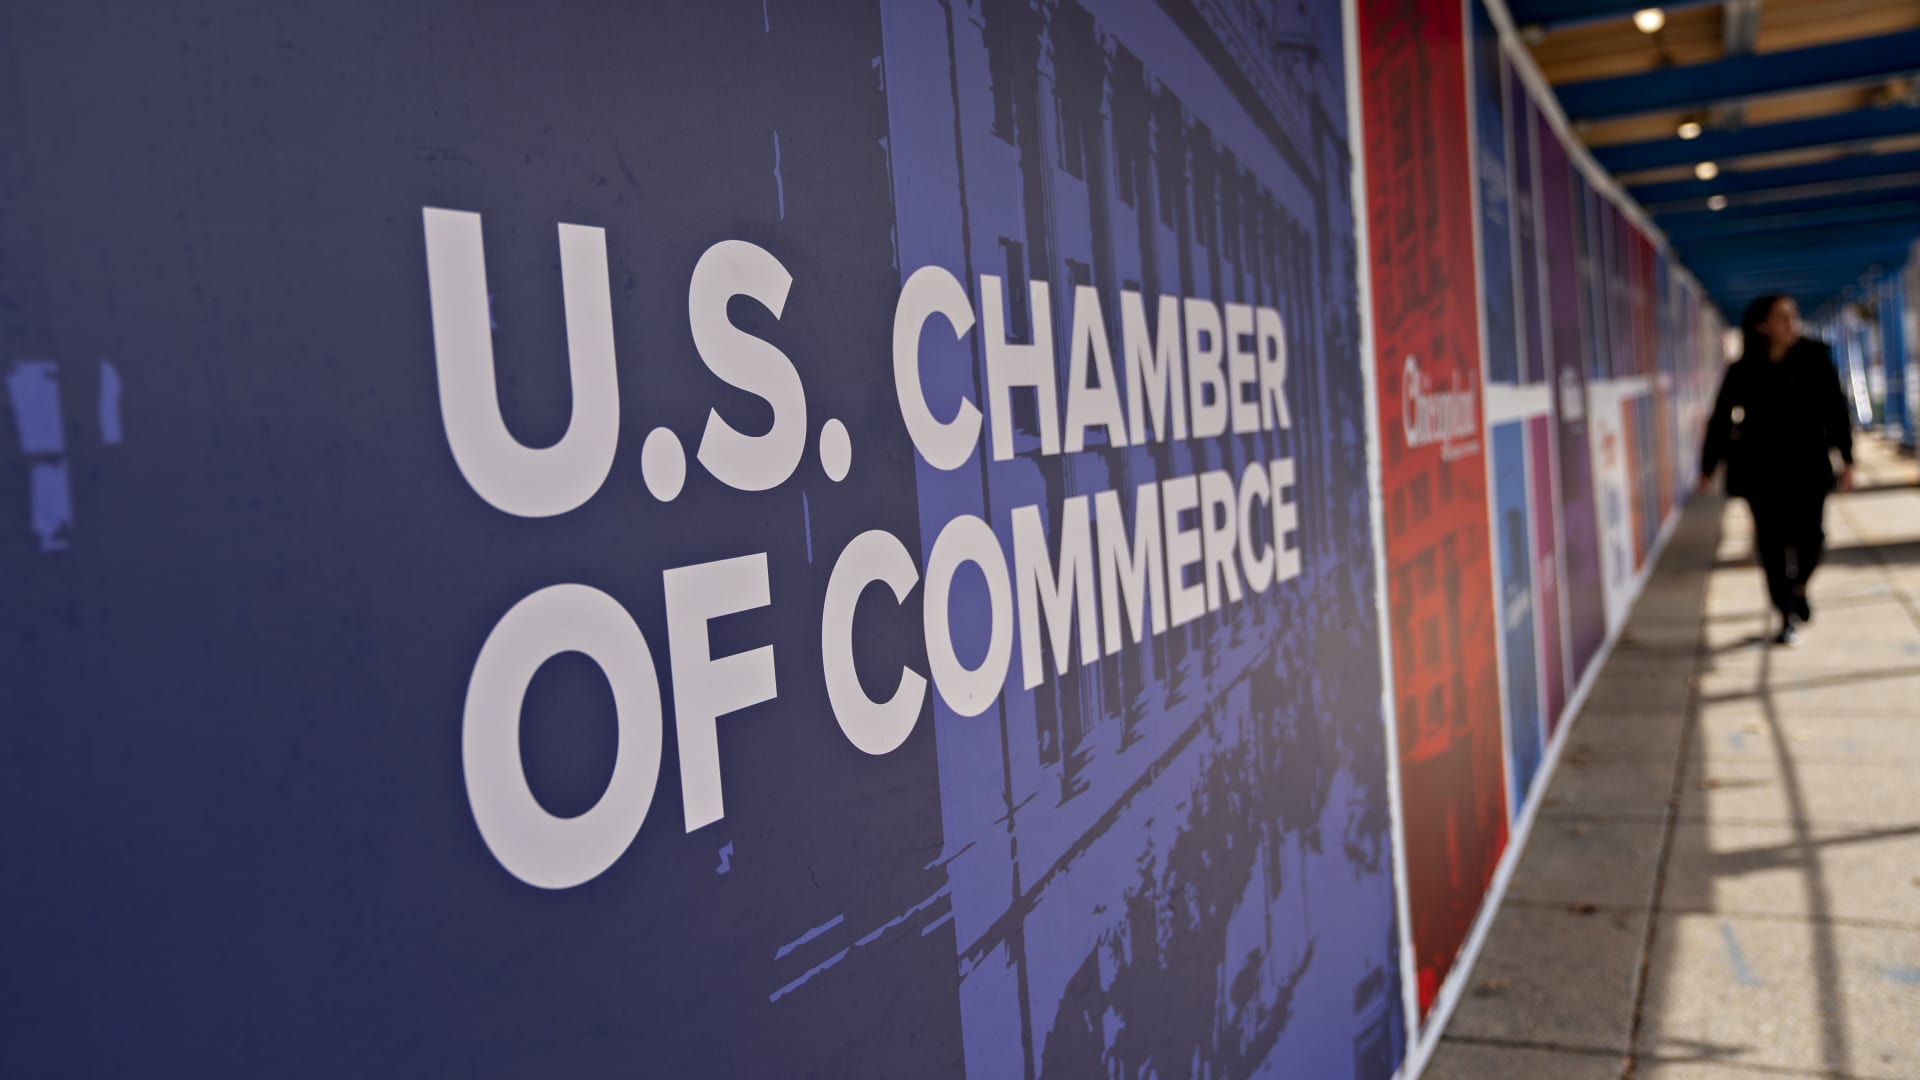 The U.S. Chamber of Commerce seal is displayed during restoration at the headquarters in Washington, D.C., U.S., on Tuesday, March 17, 2020.